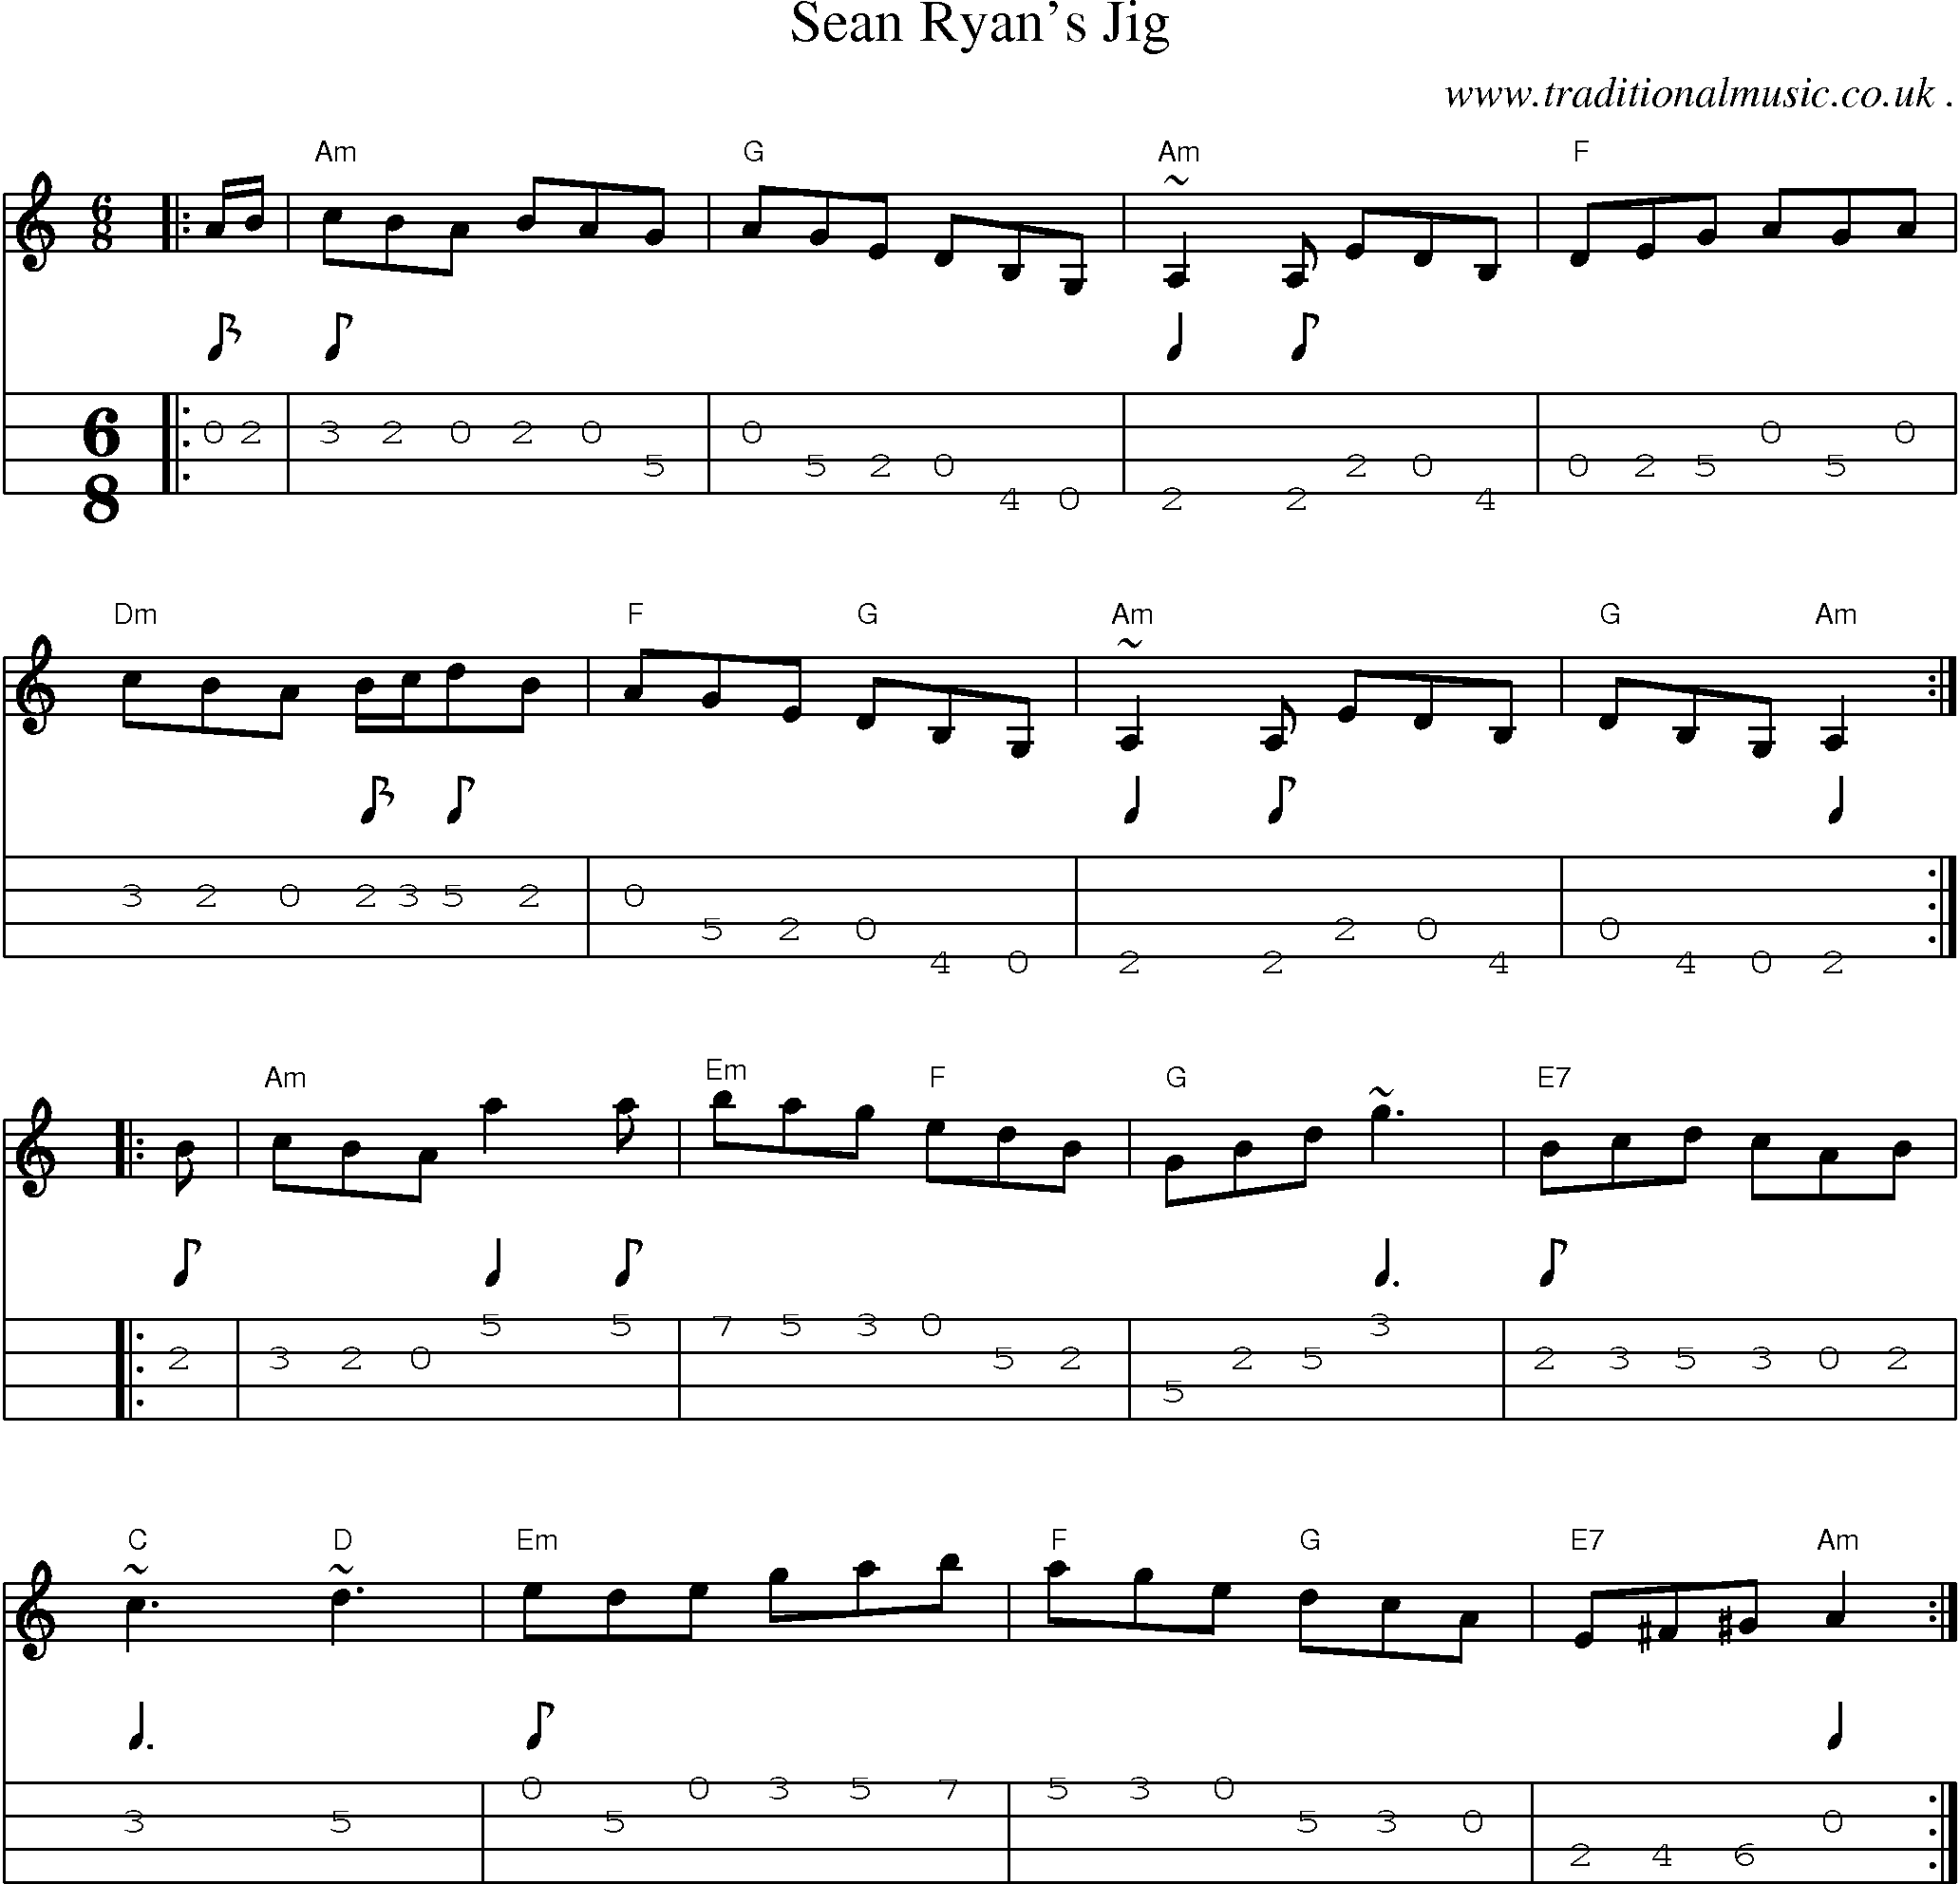 Music Score and Guitar Tabs for Sean Ryans Jig